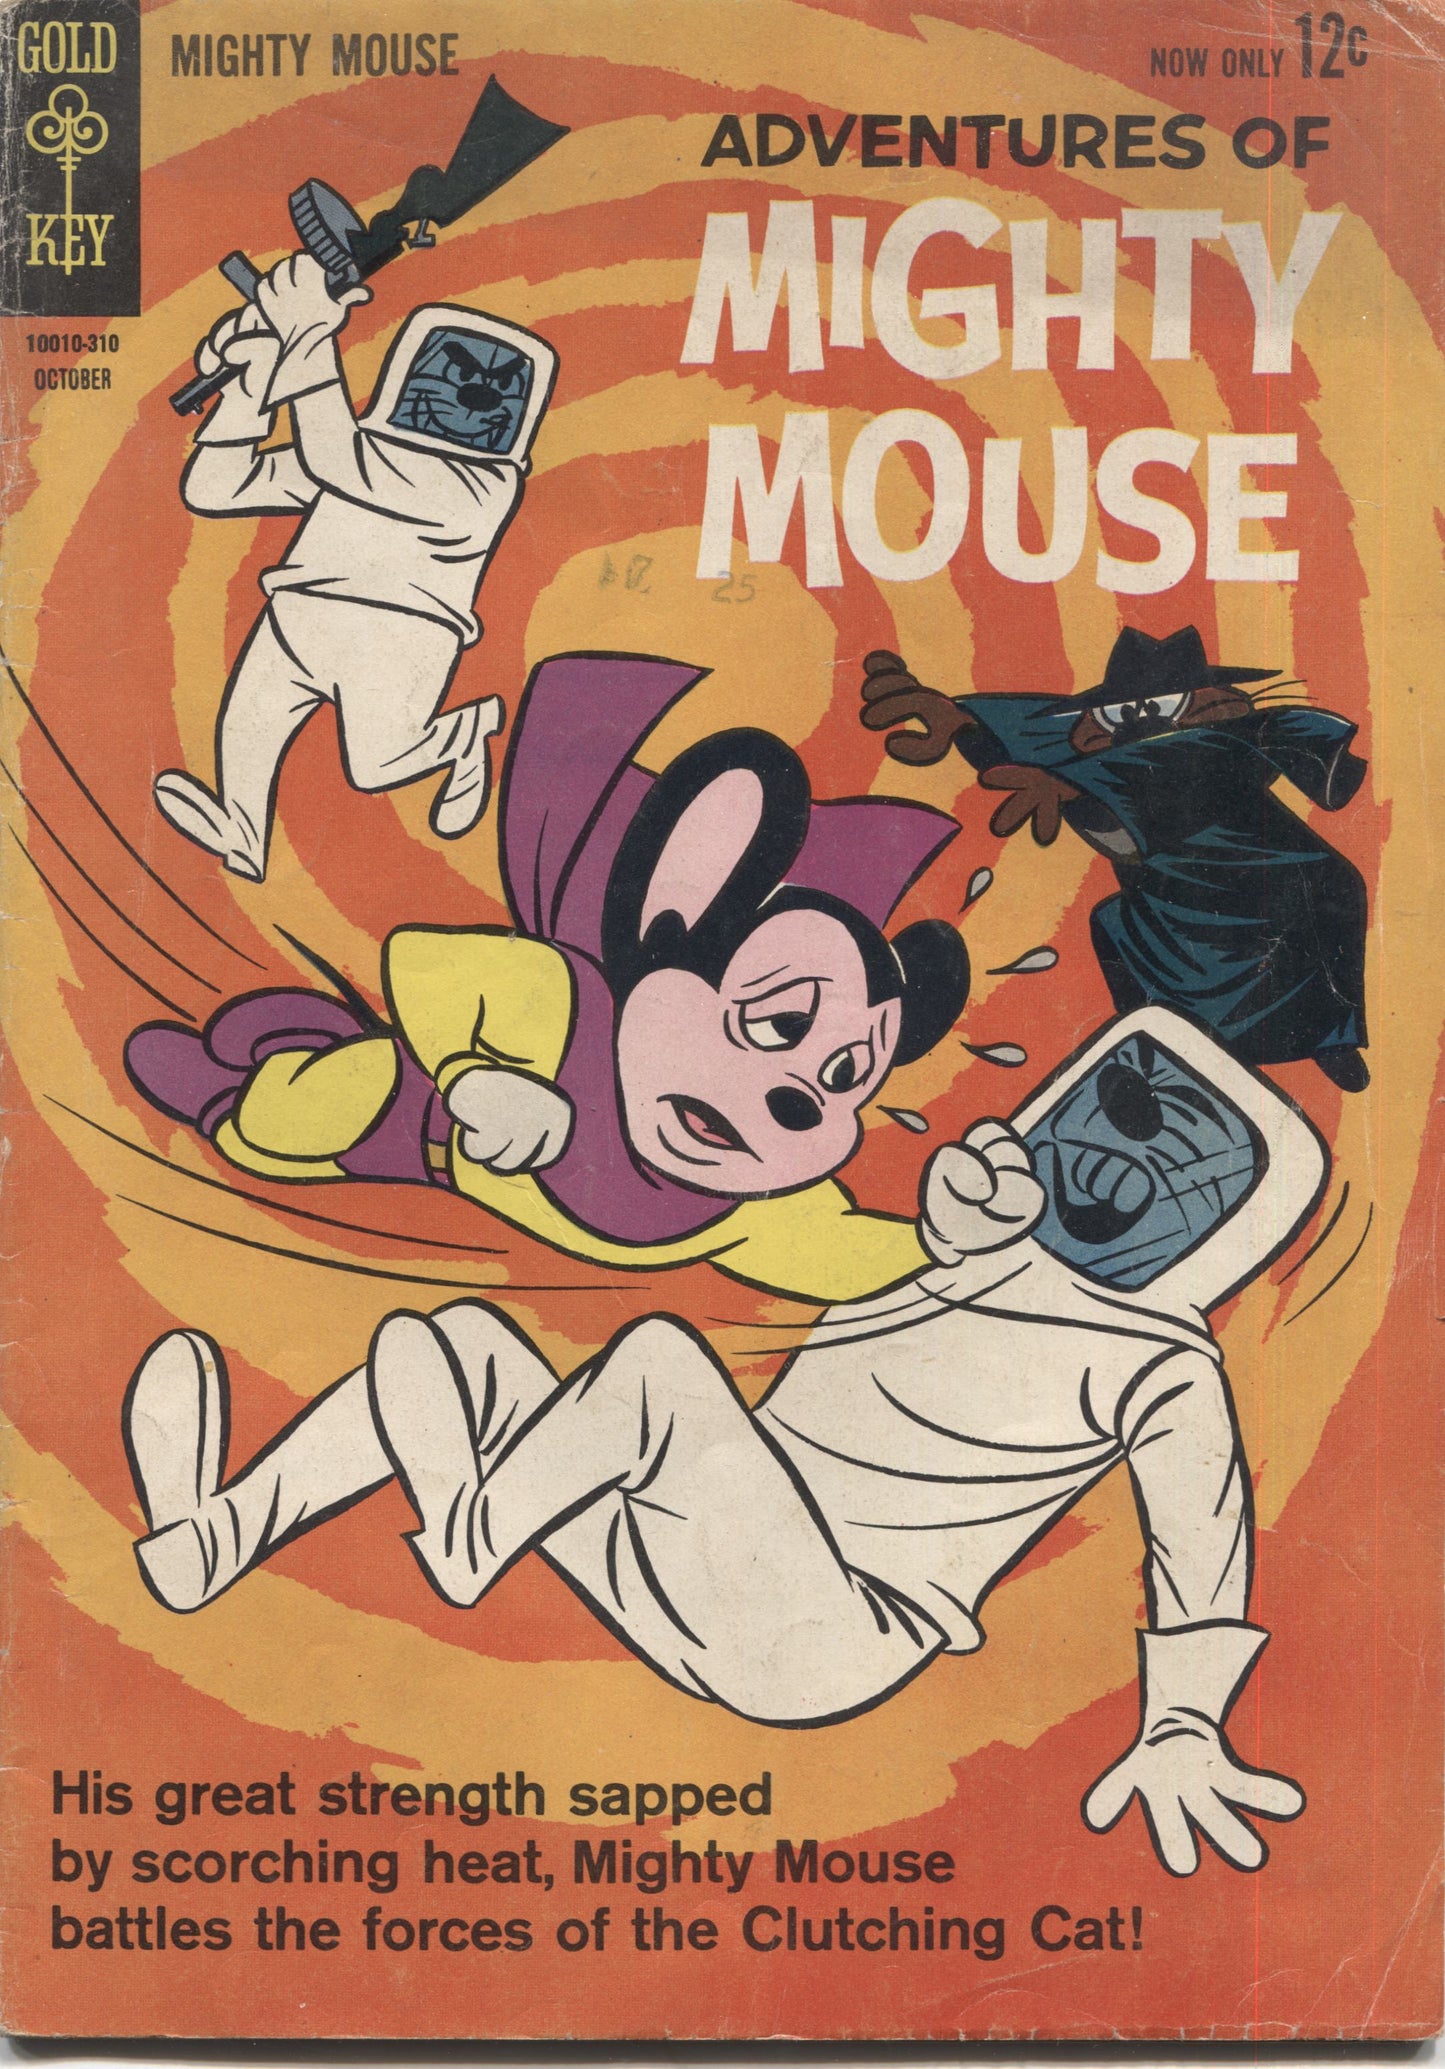 Adventures of Mighty Mouse No. 160, Gold Key Comics, October 1963